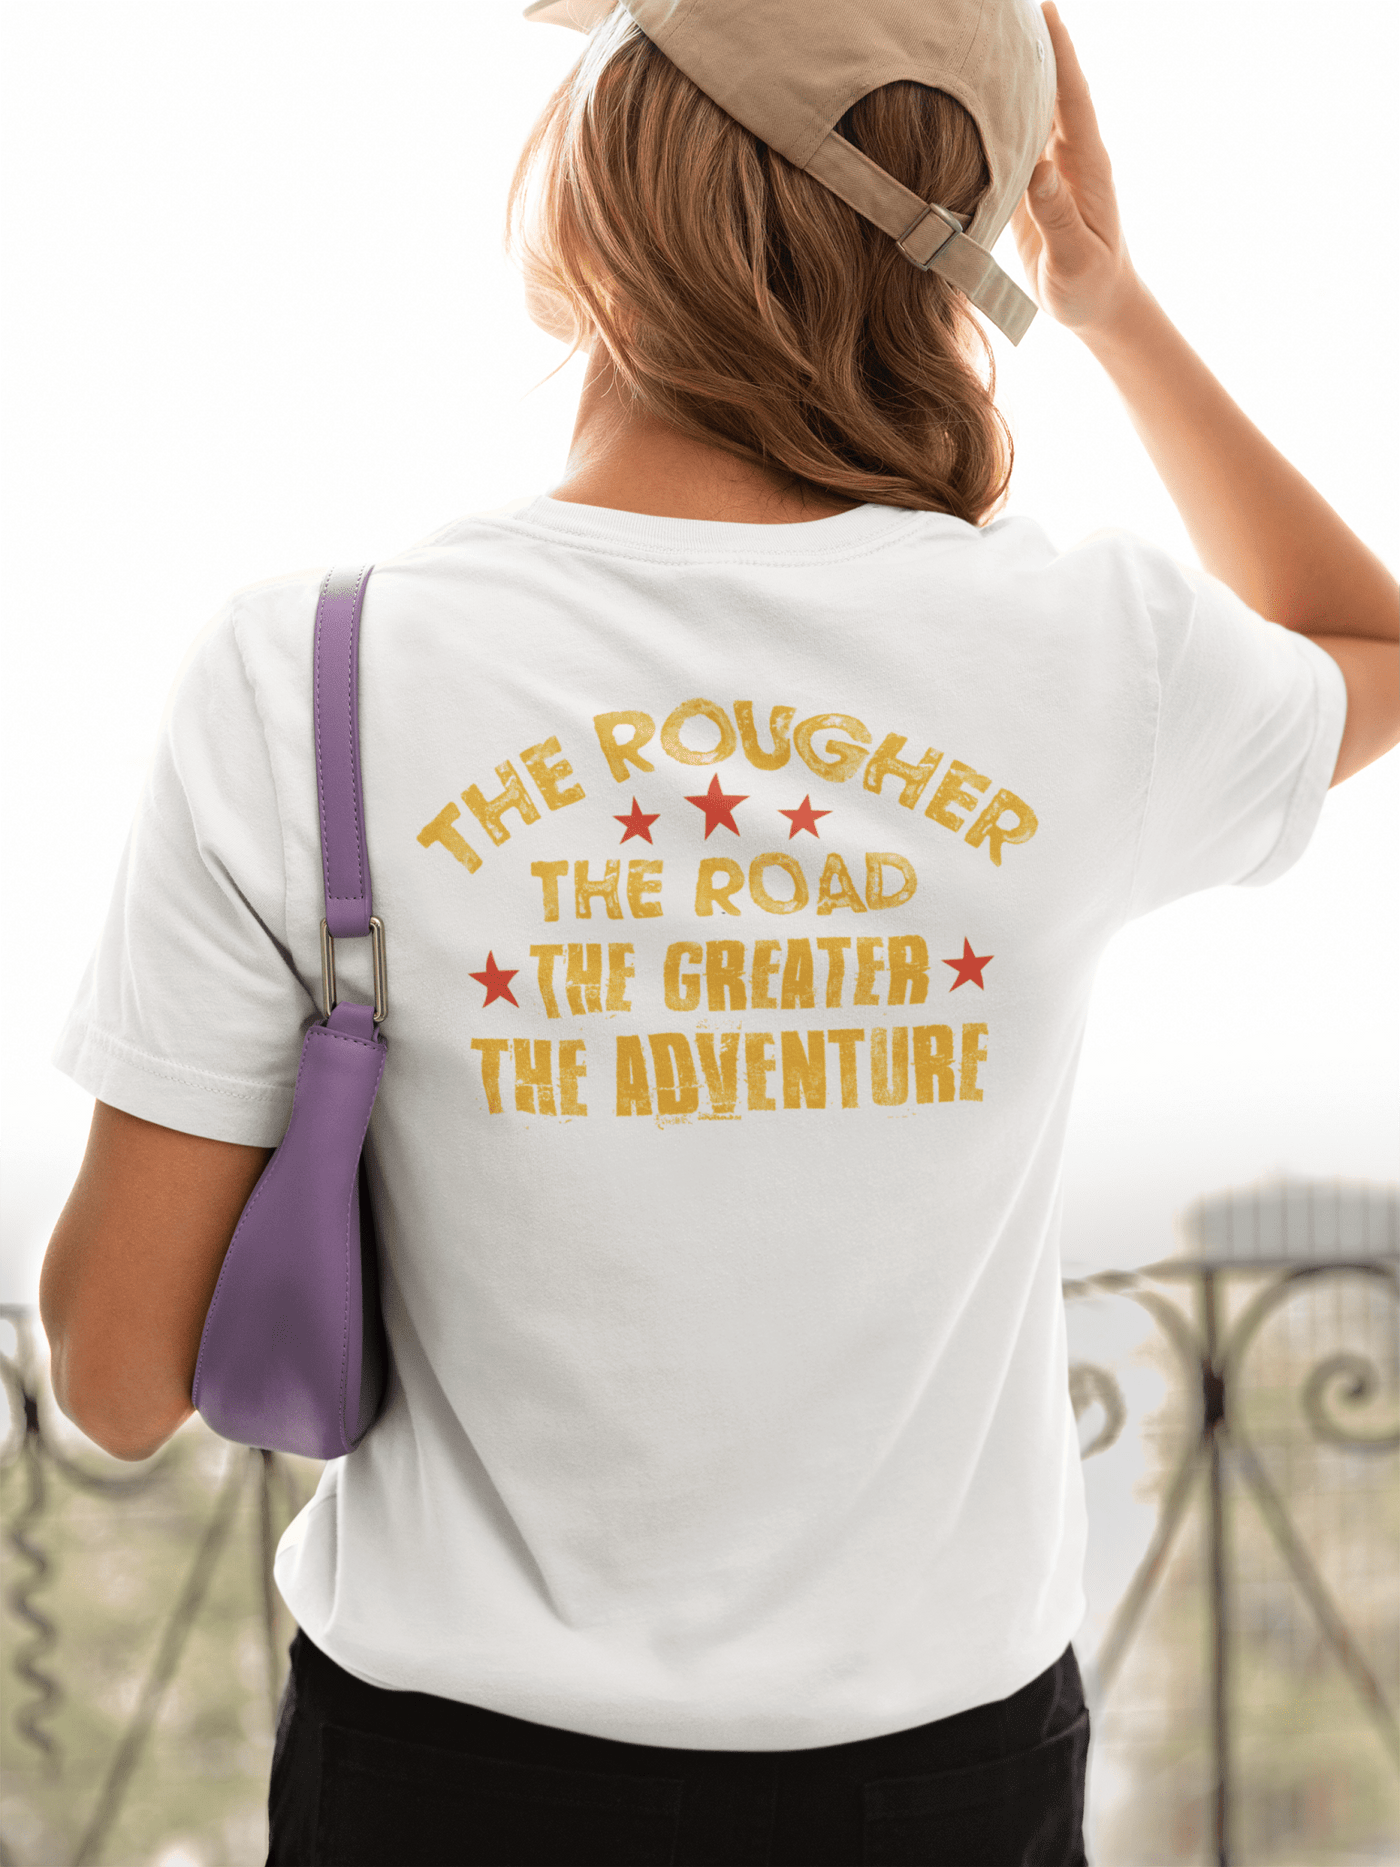 Big and Tall Tee Shirt-Great Adventures Rough Roads - Goats Trail Off-Road Apparel Company